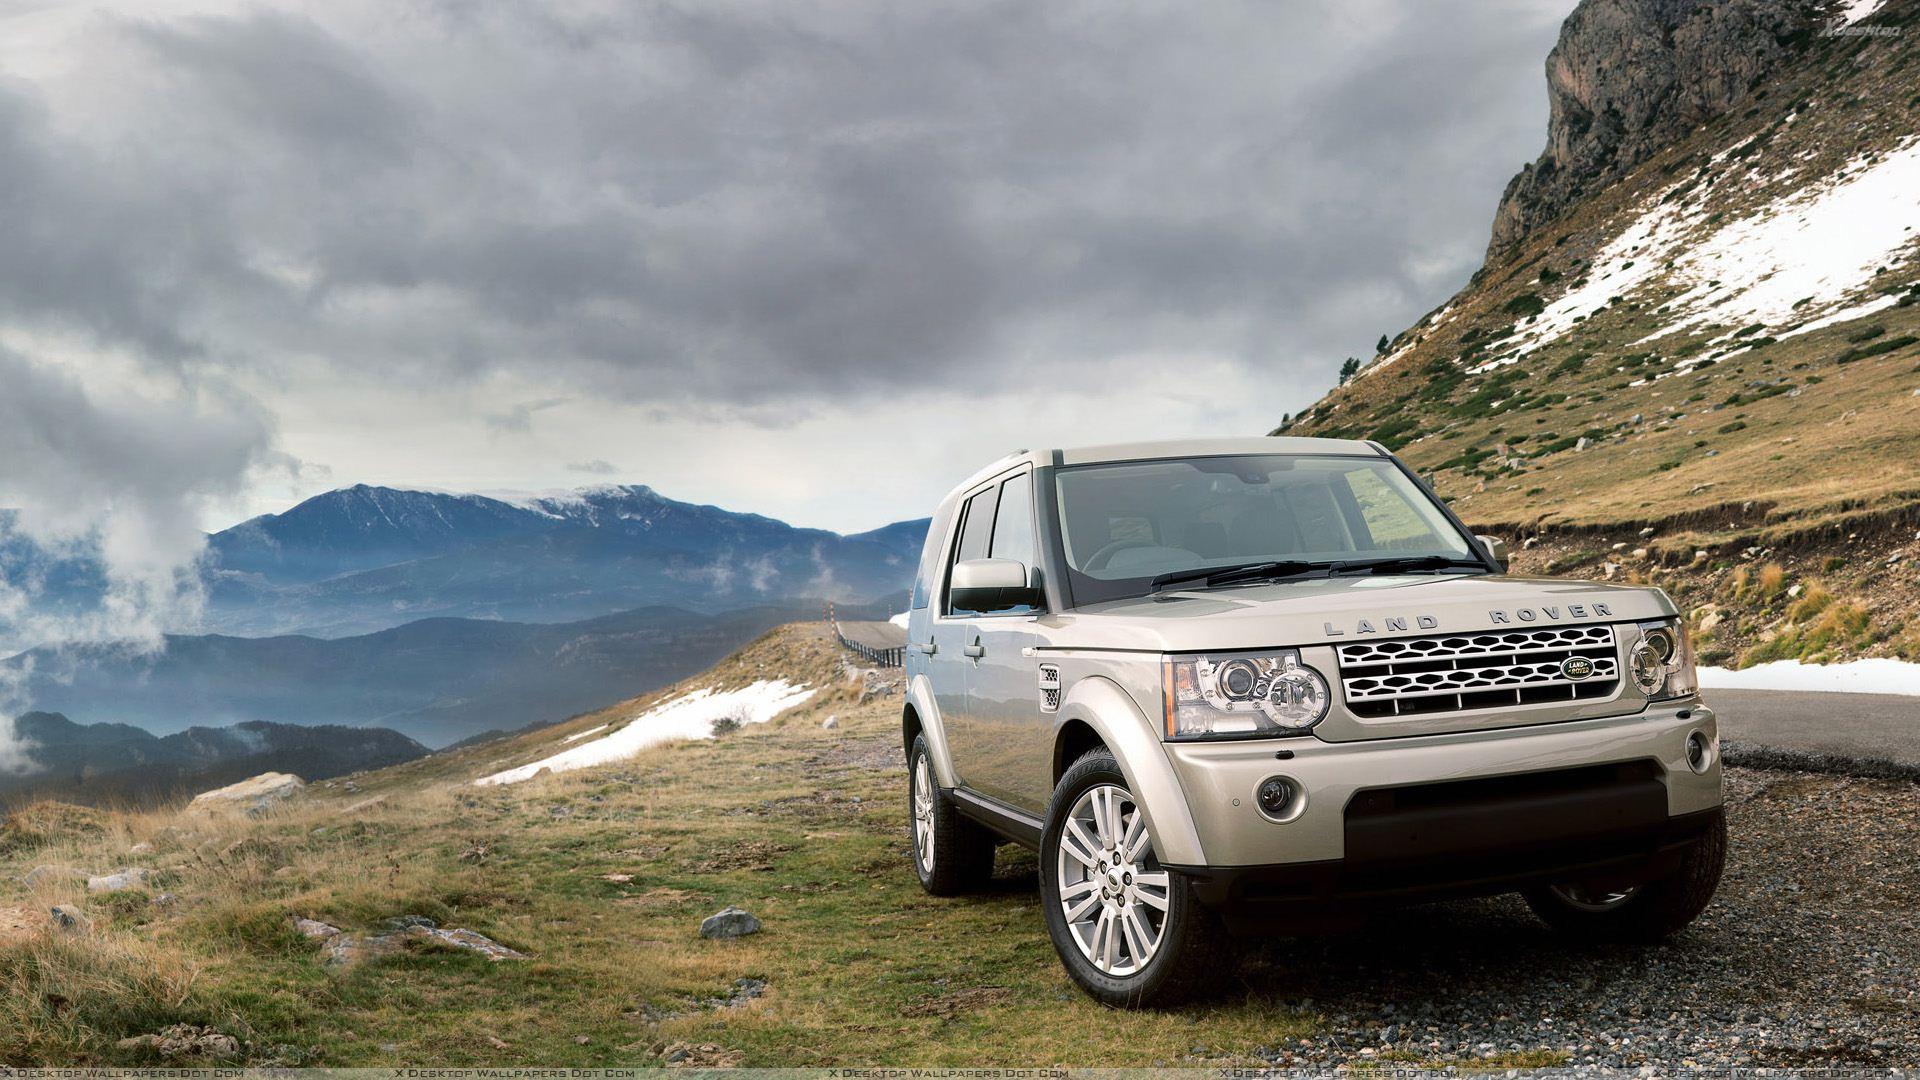 Land Rover Discovery Wallpaper 1920x1080 px, #DANJH1I